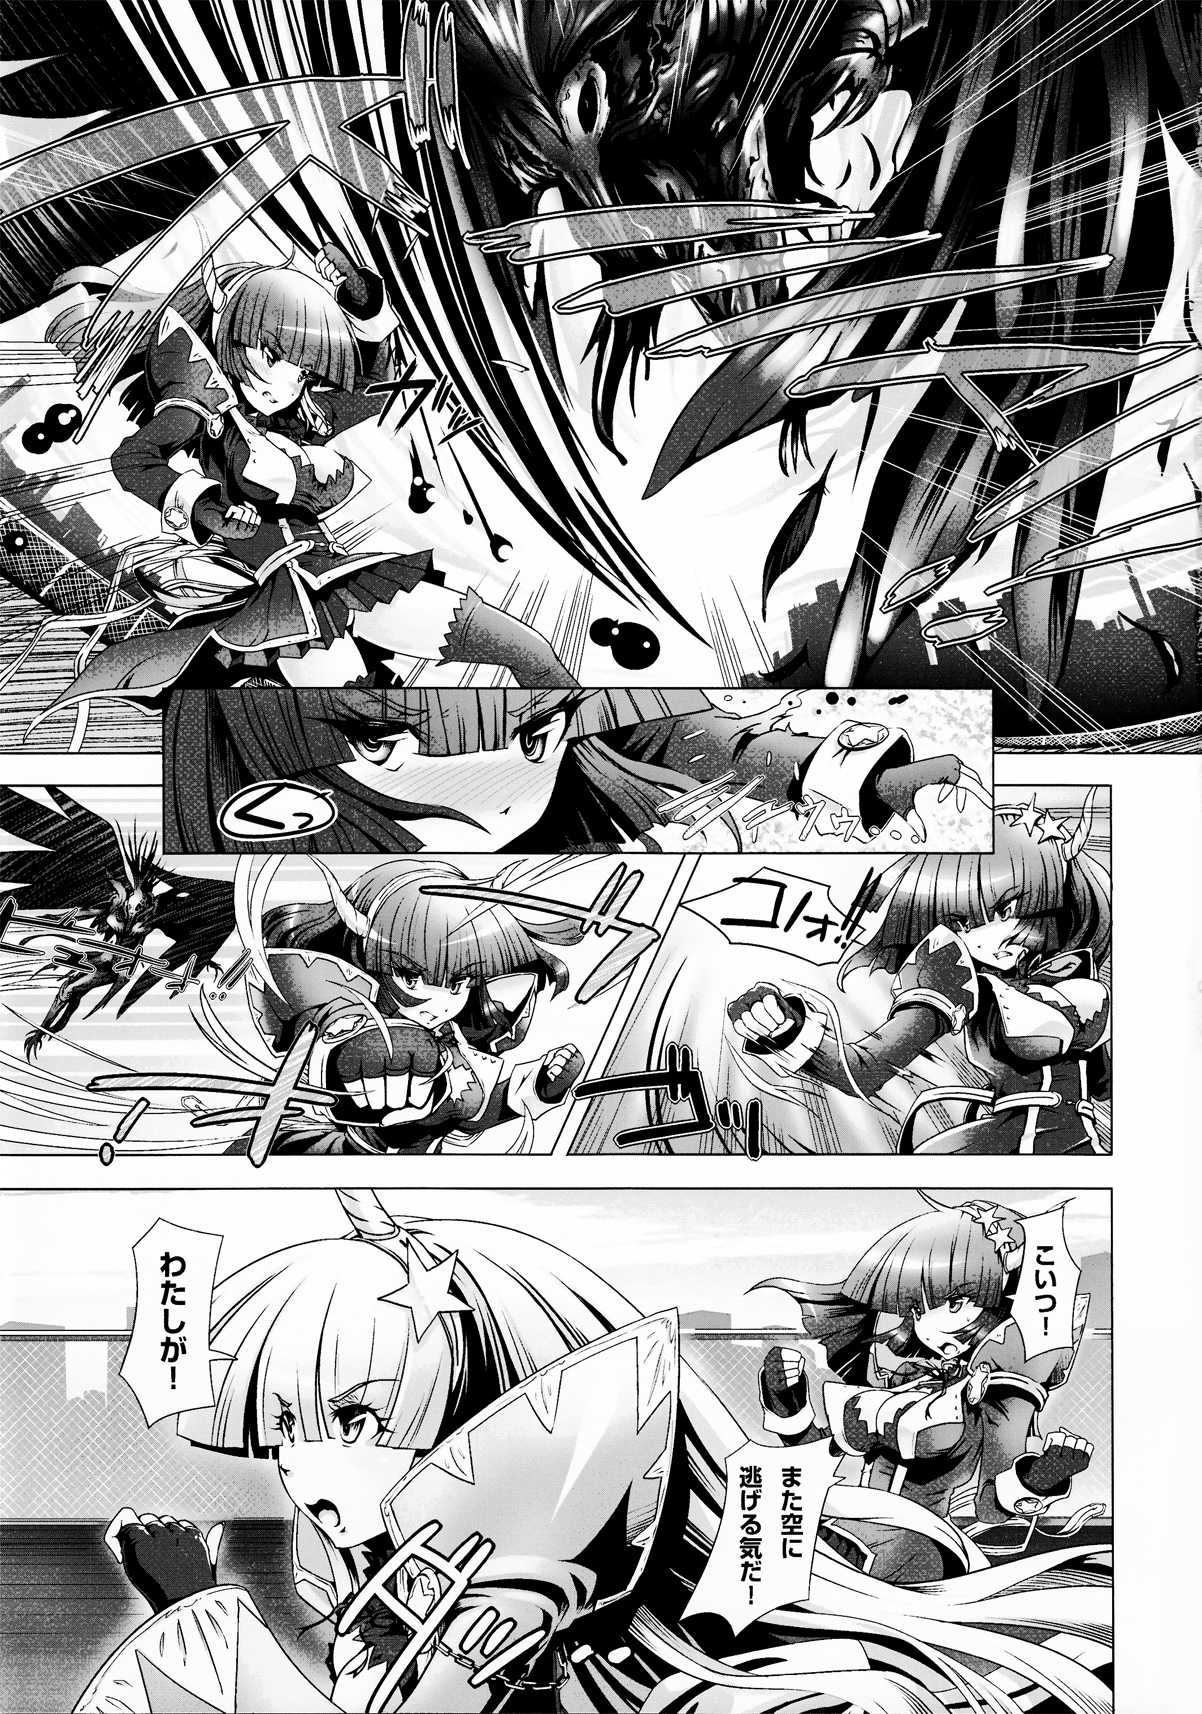 (Futaket 8) [NOTE-ISM]  Girls Cross Synthesis 